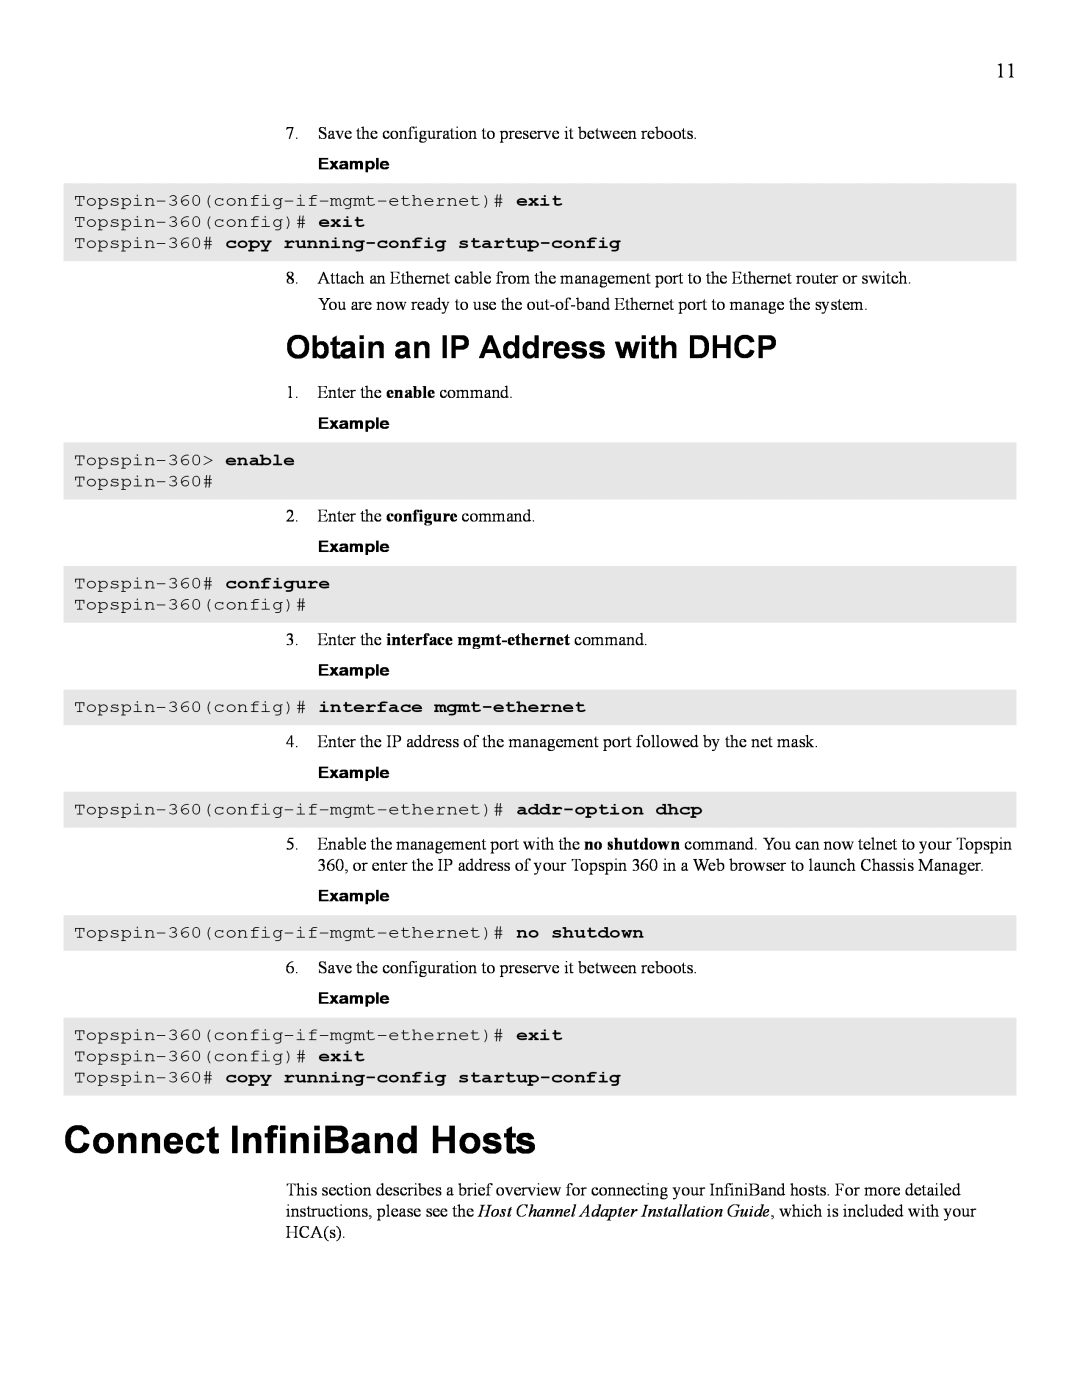 Cisco Systems SFS 3012 Connect InfiniBand Hosts, Obtain an IP Address with DHCP, Enter the interface mgmt-ethernet command 